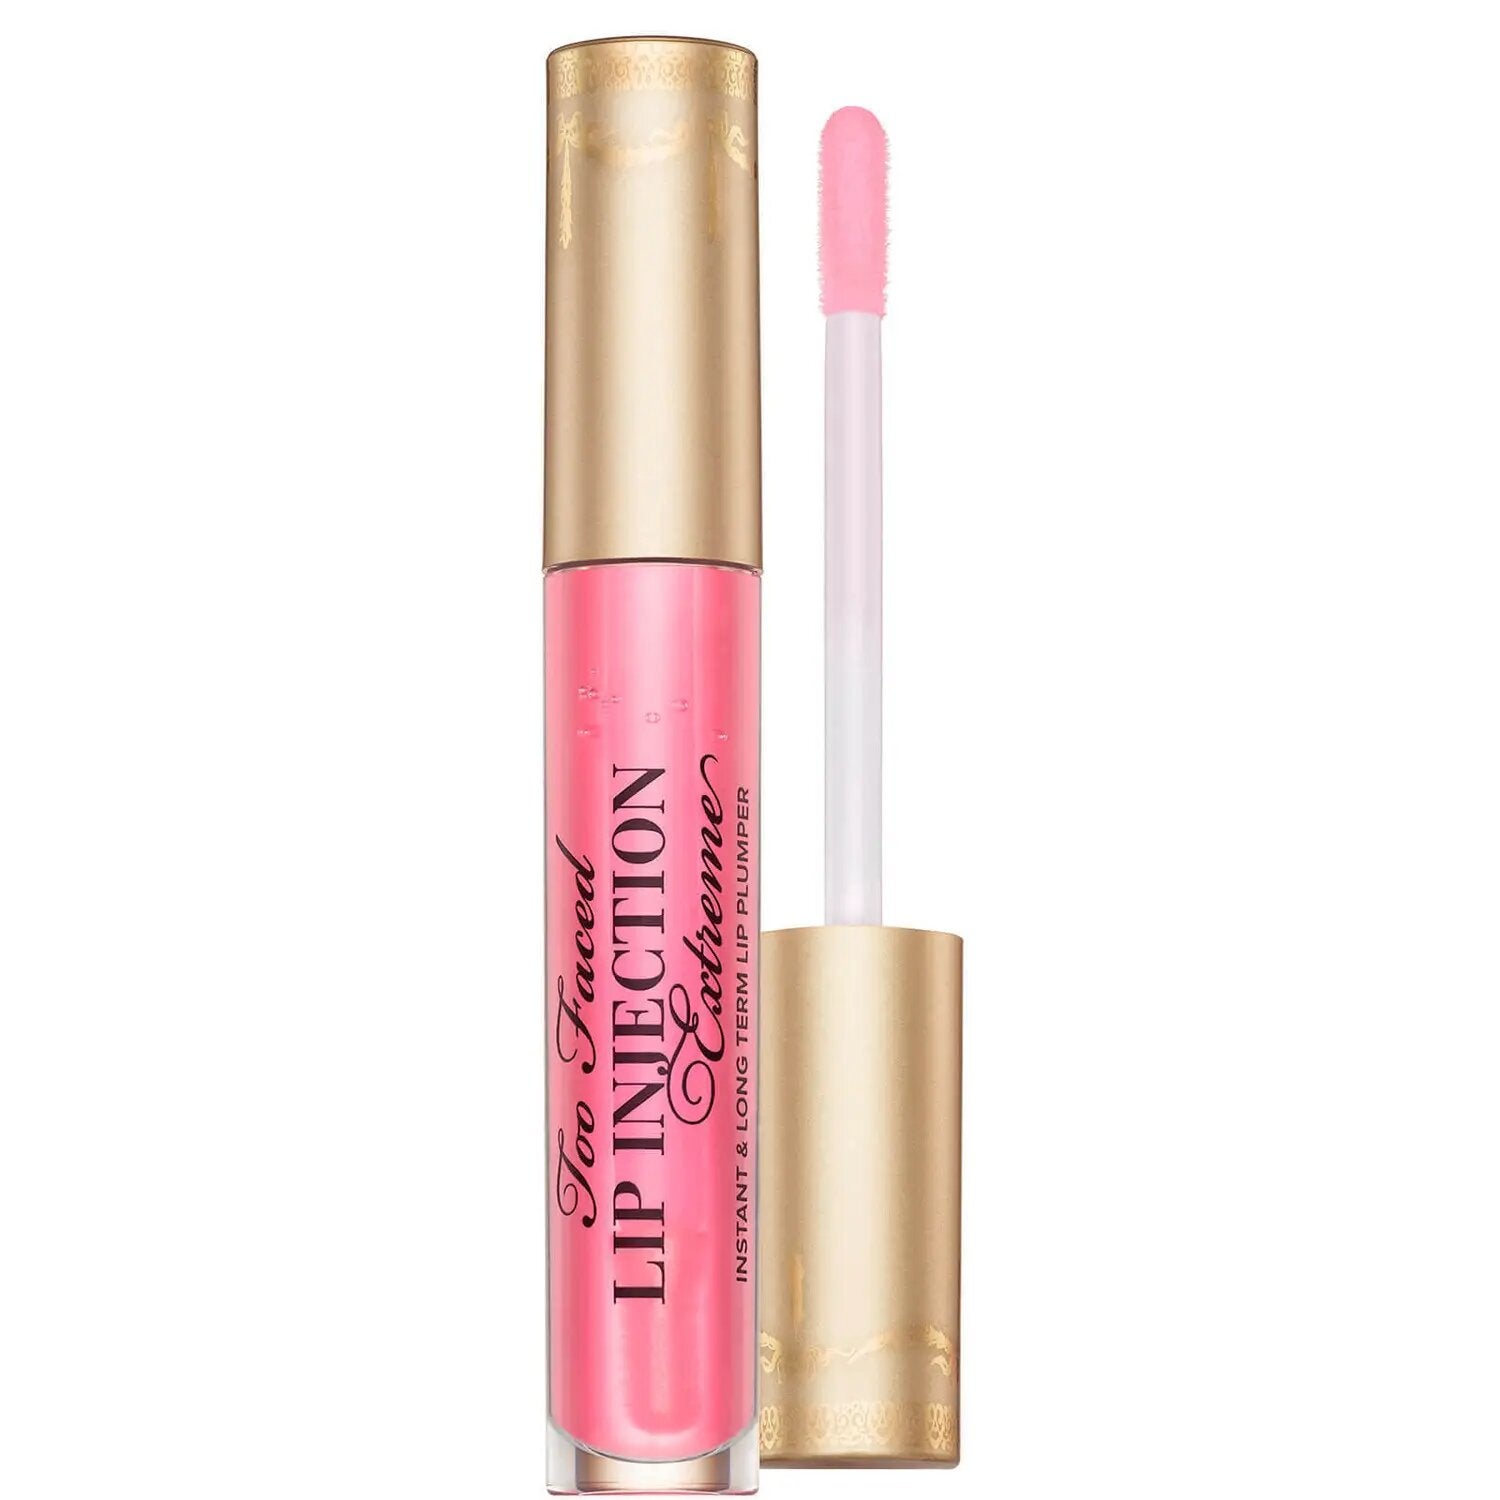 Too Faced + Lip Injection Extreme – Bubblegum Yum